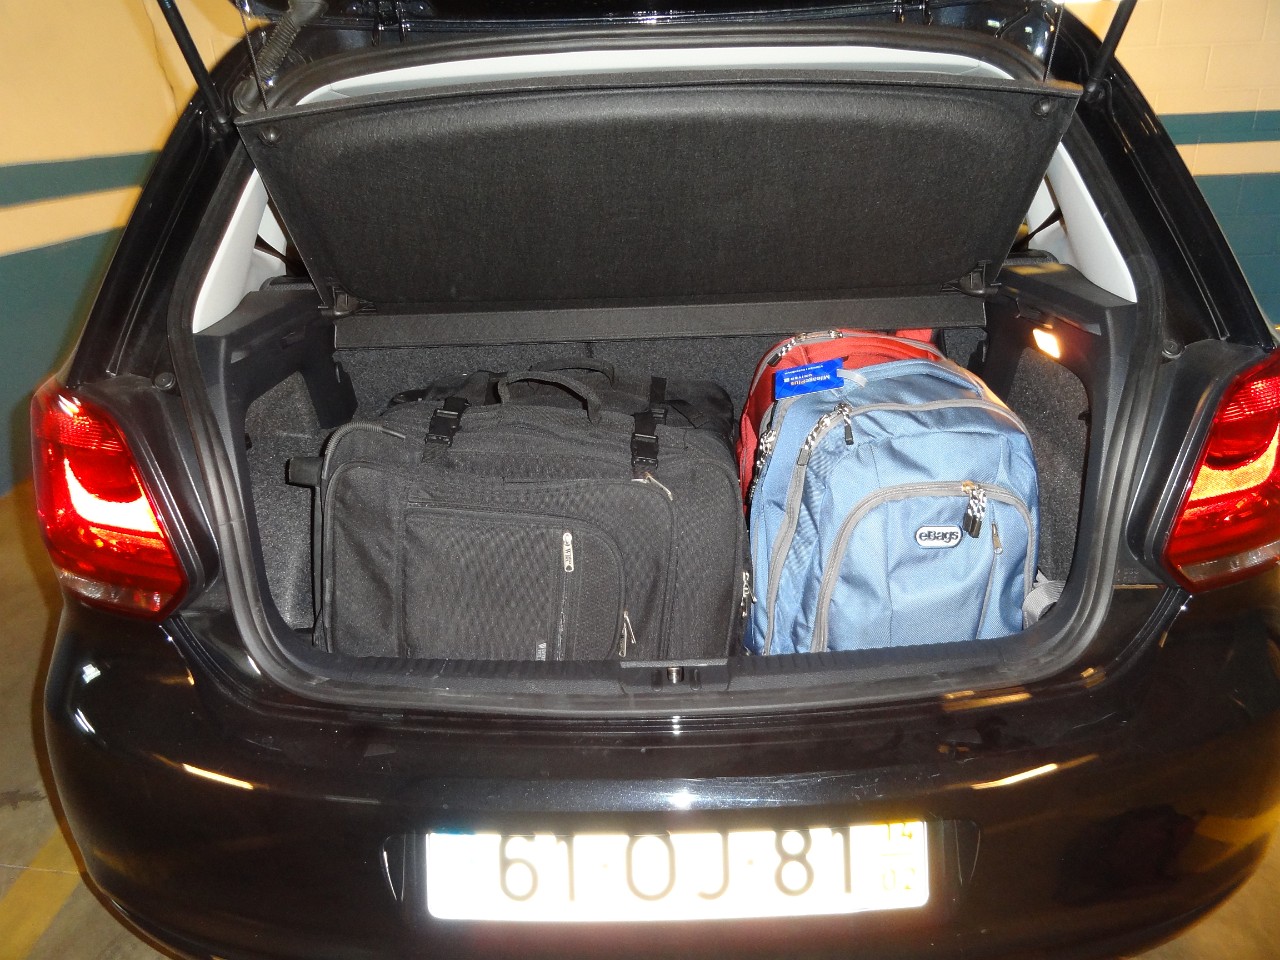 VW Polo trunk space - enough for 2 carry ons and 2 big laptop bags